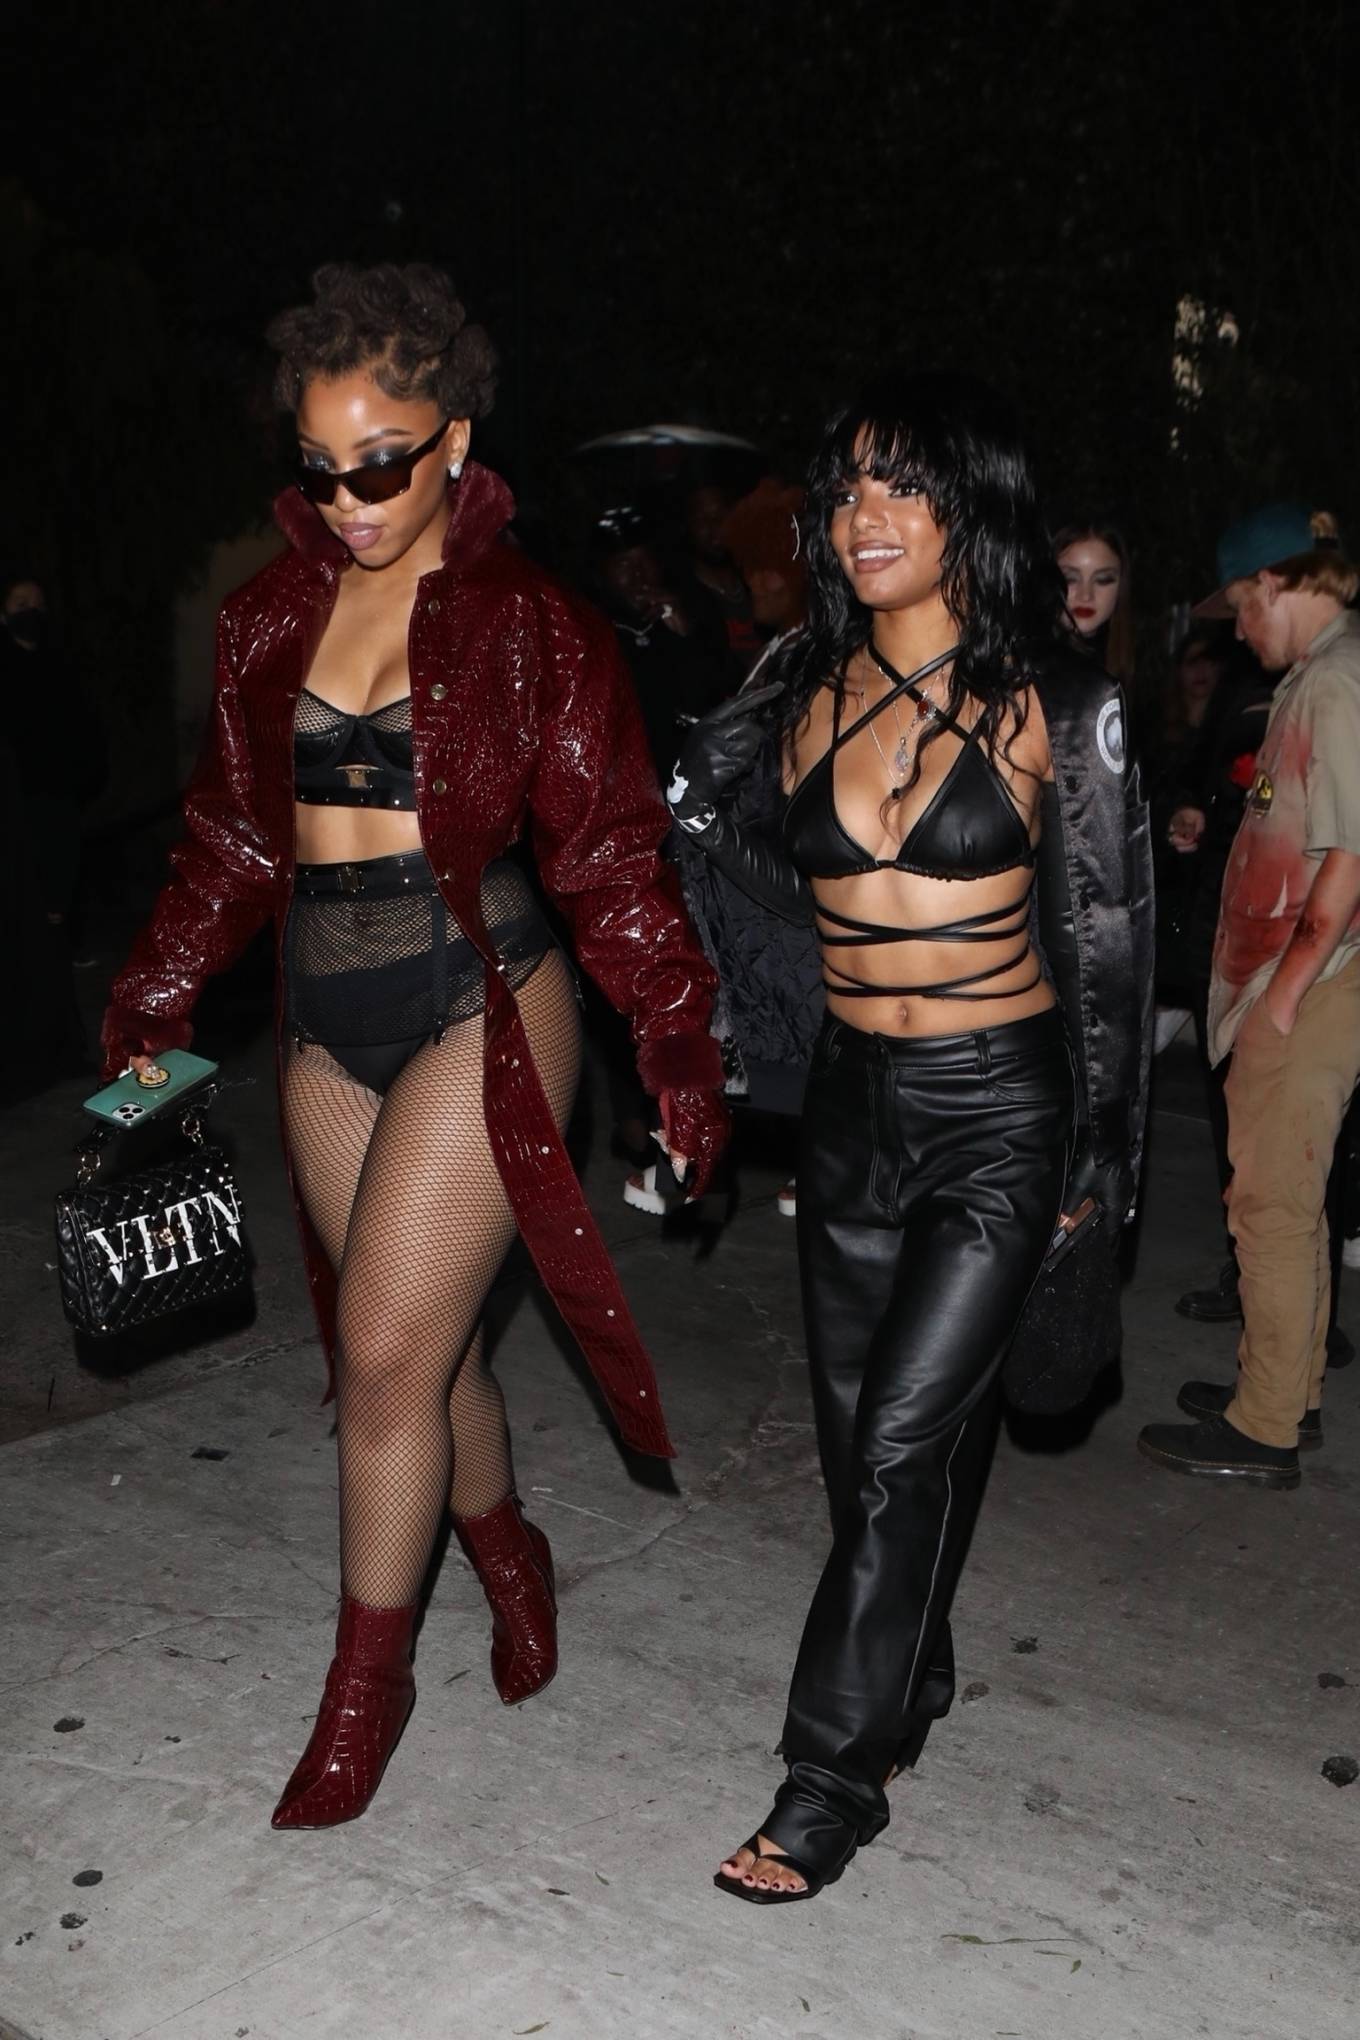 Chloe and Halle Bailey - at Megan Thee Stallion's Halloween party in West Hollywood